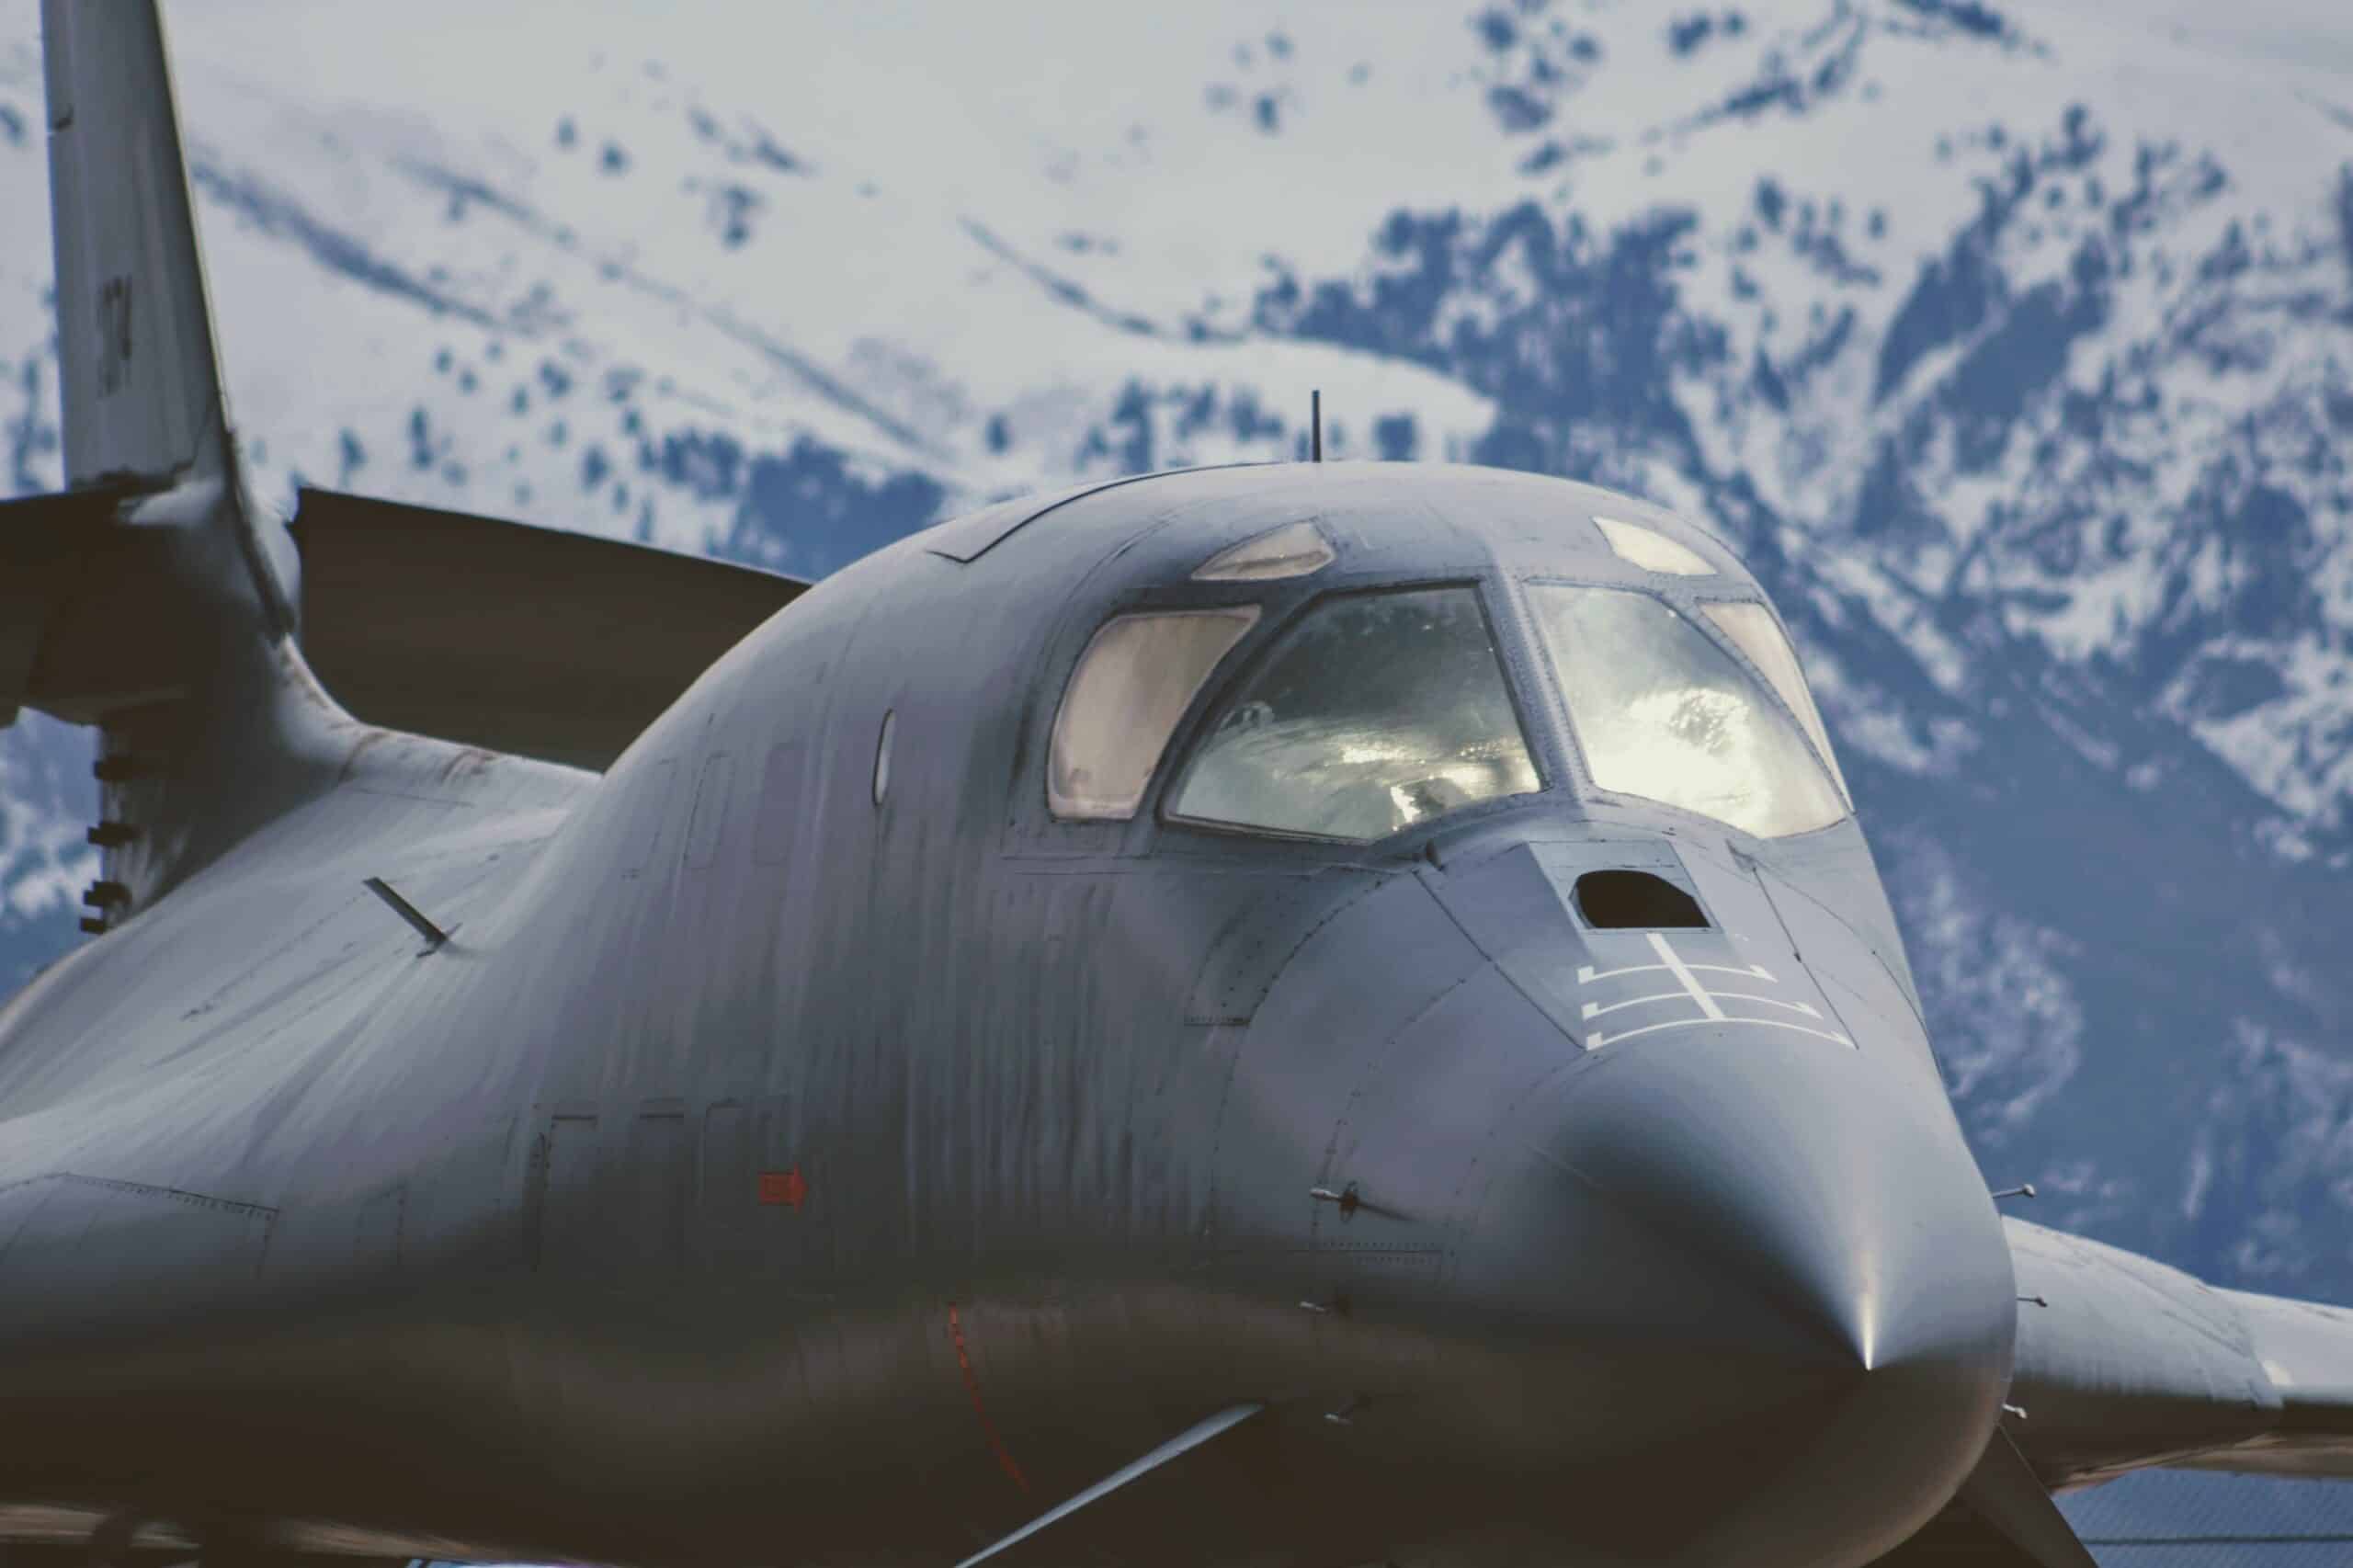 A black military jet parked in front of snowy mountains.